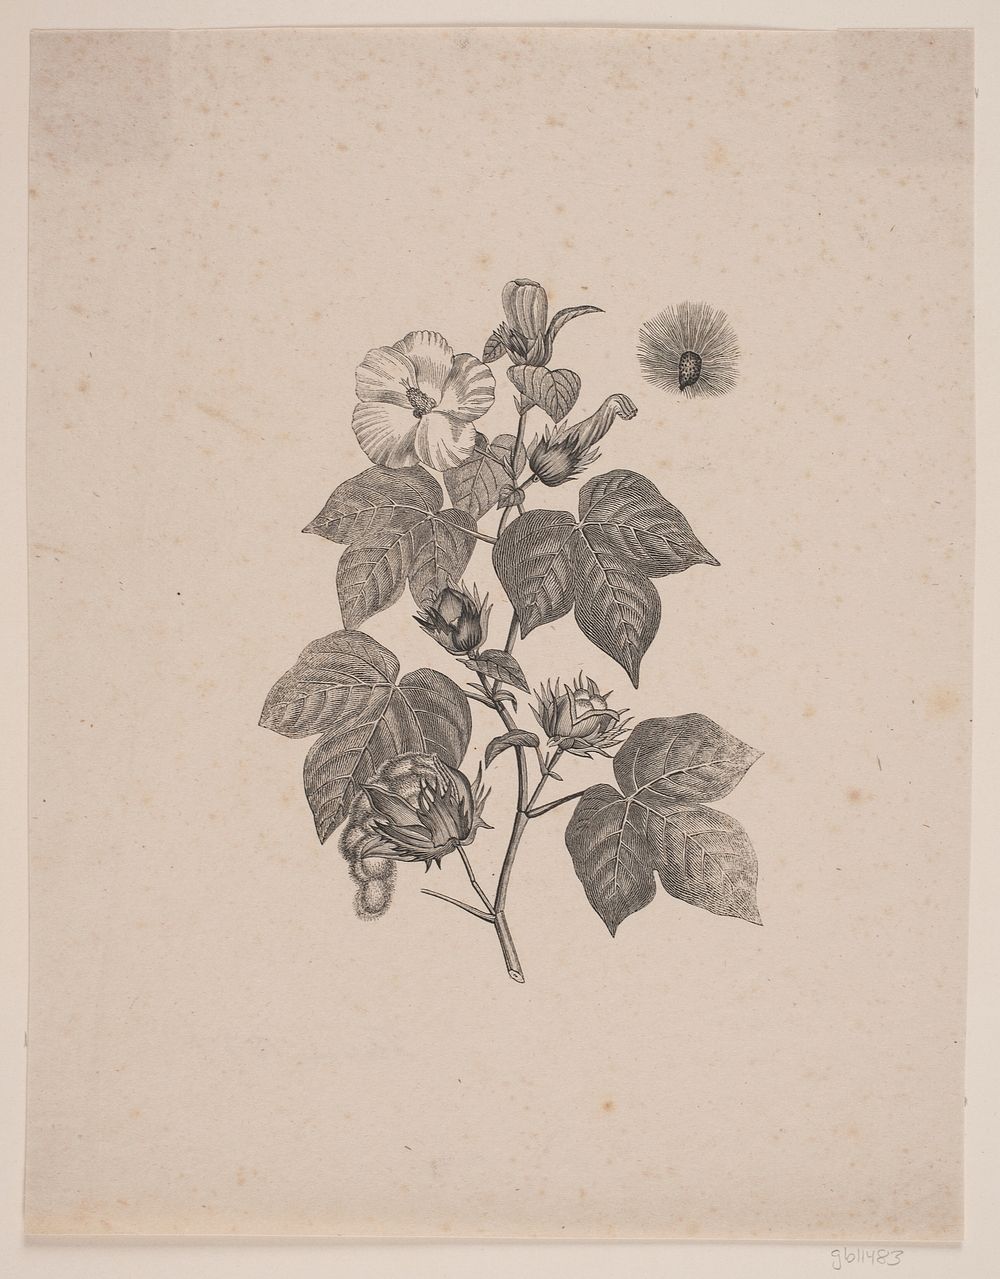 Cotton plant by Andreas Christian Ferdinand Flinch